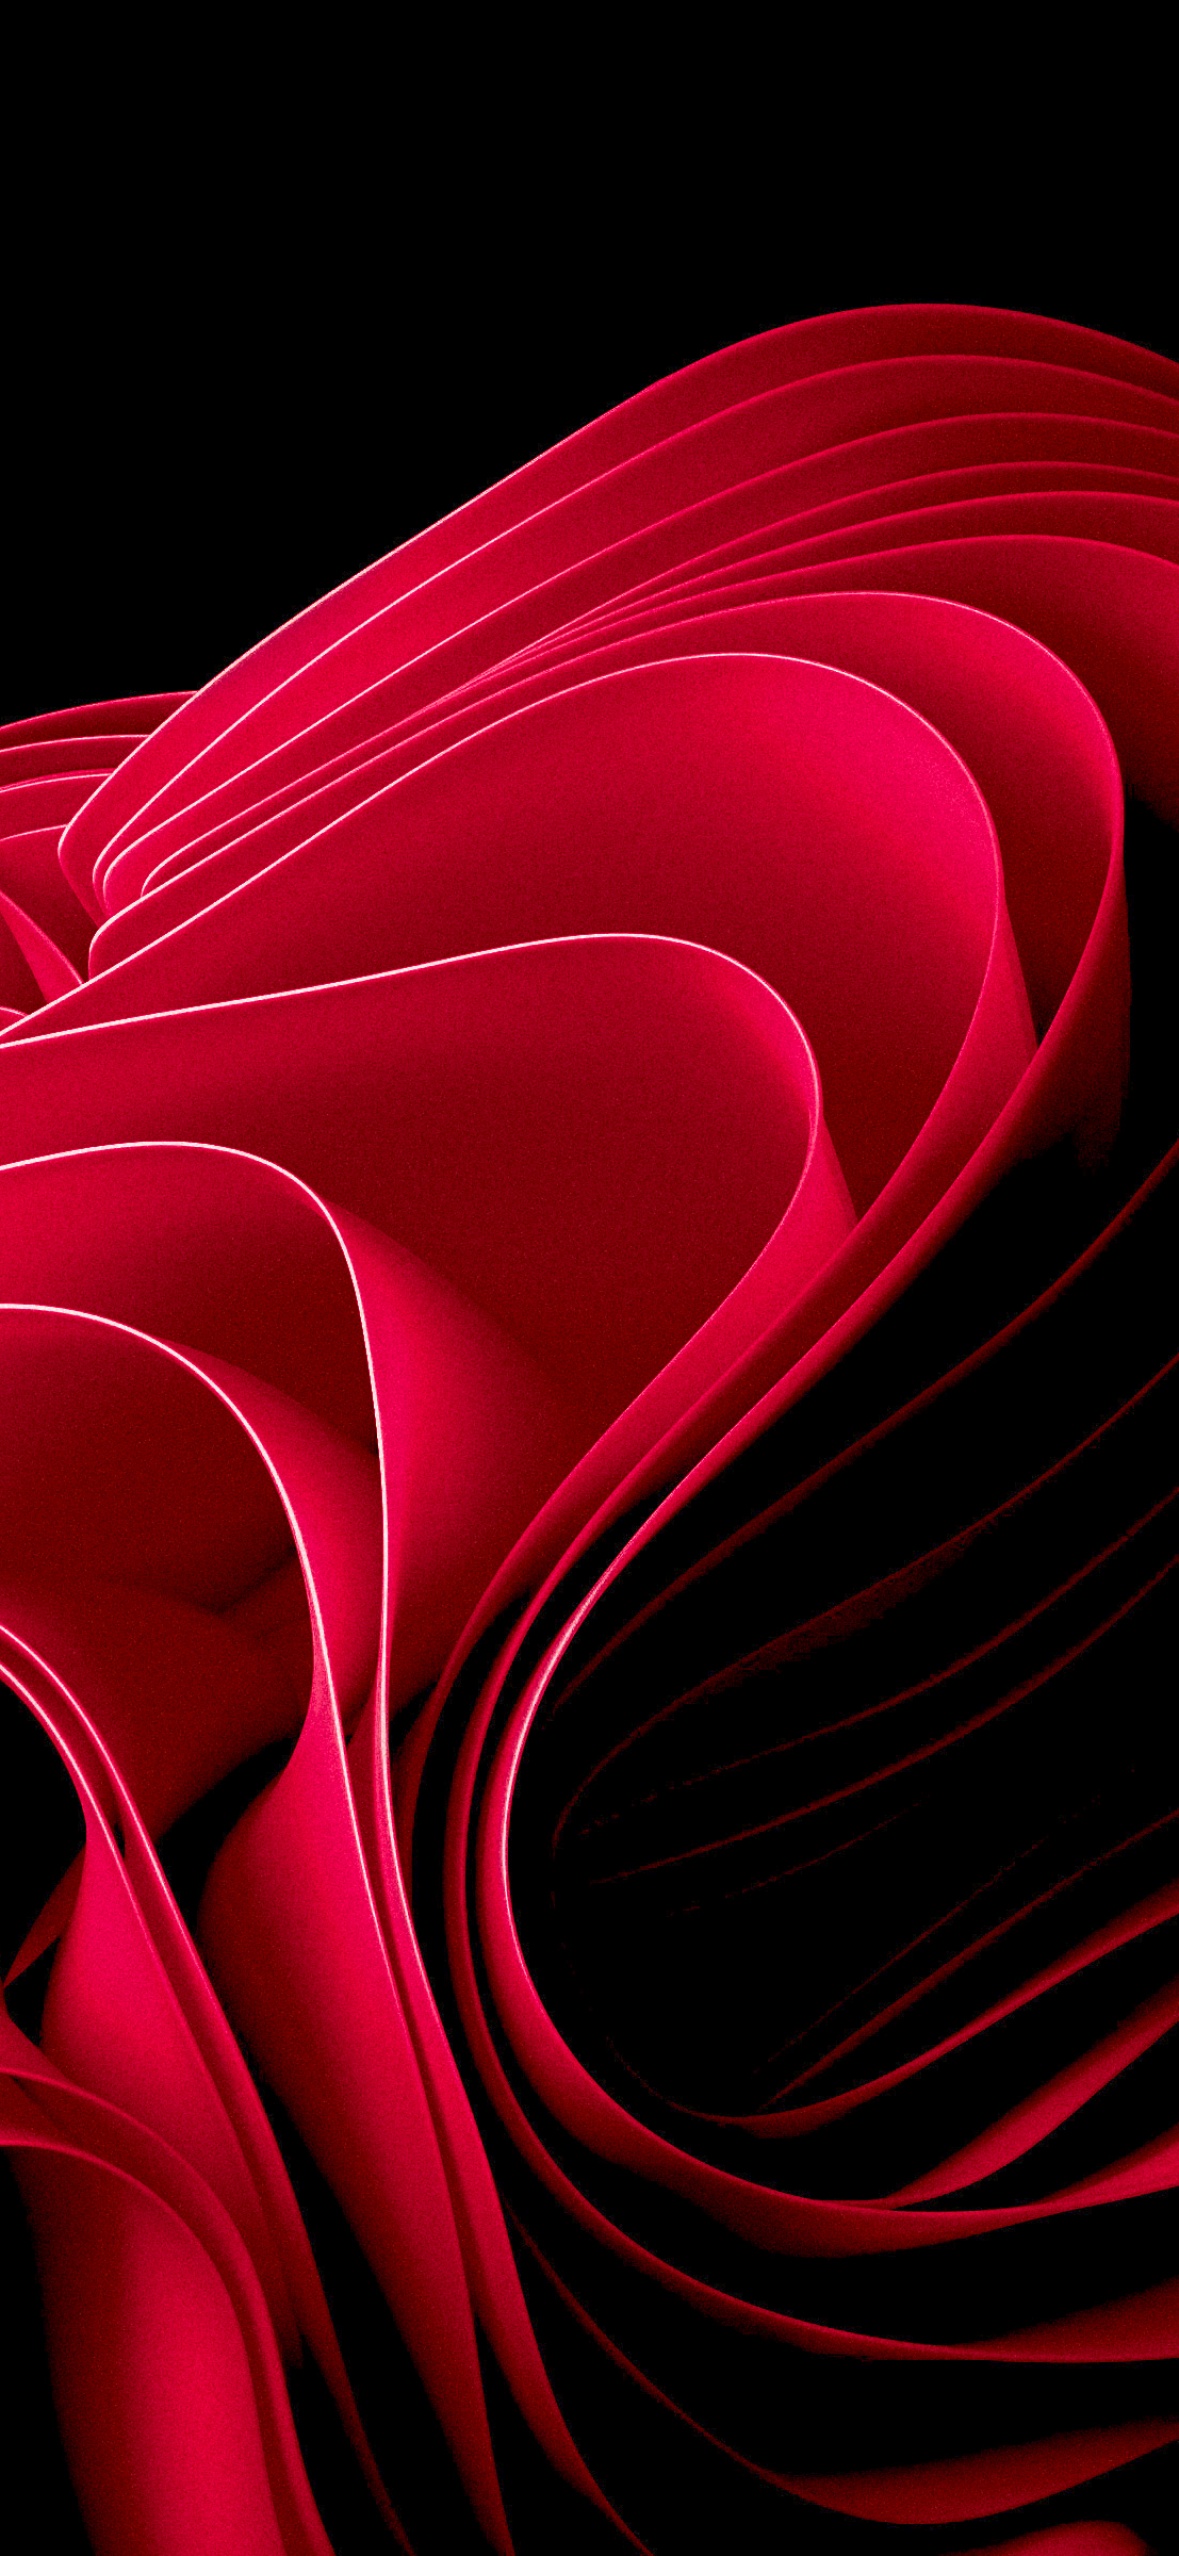 Windows 11 Wallpaper 4K, Red abstract